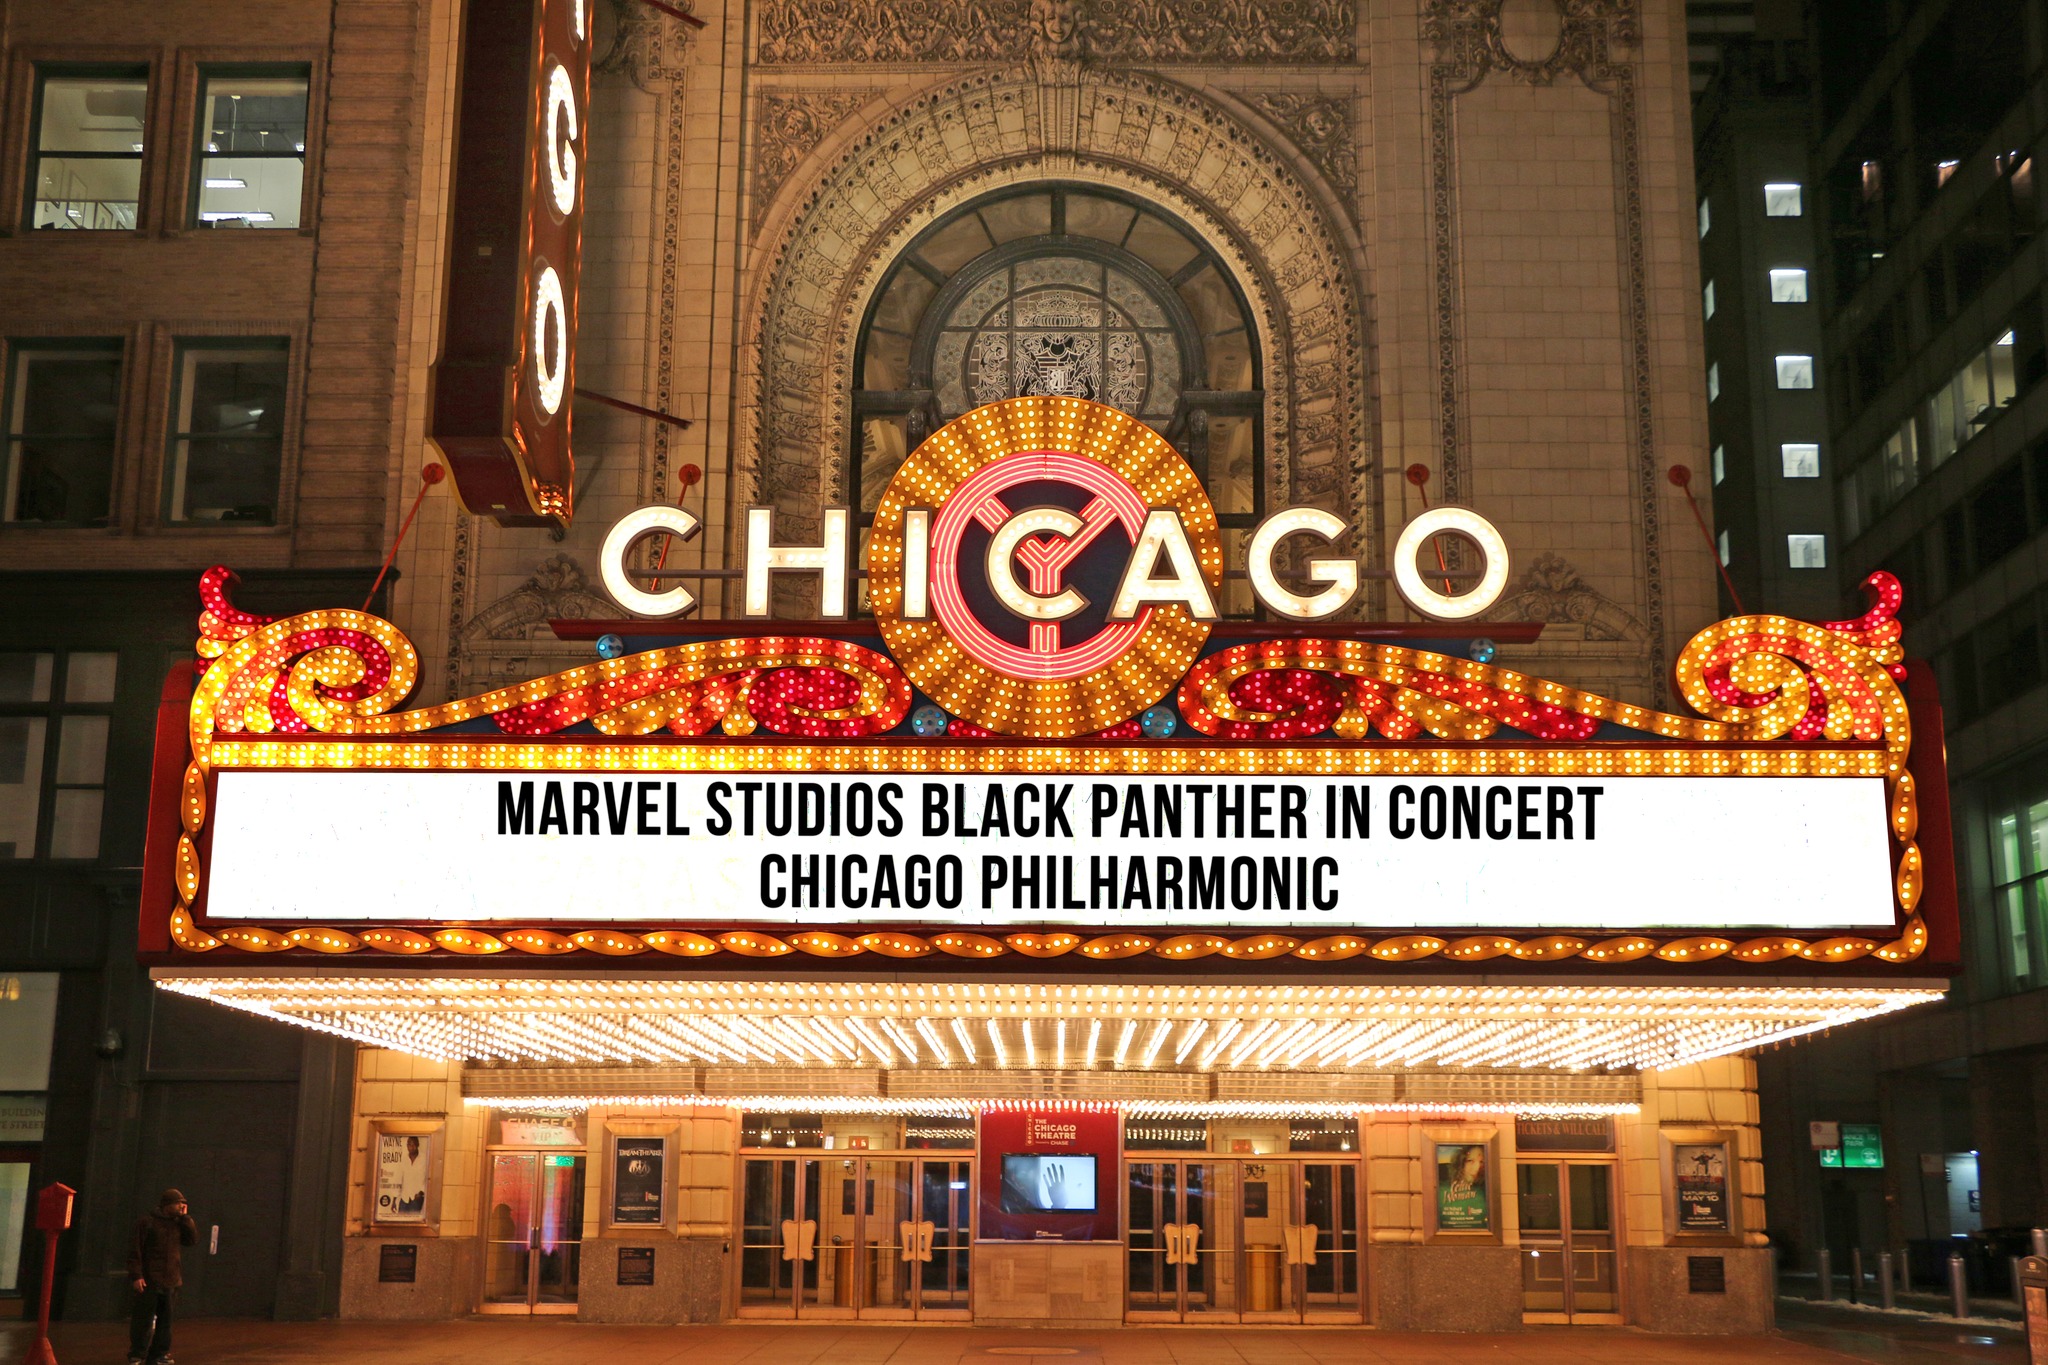 Exterior of the Chicago Theater shows Black Panther concert announcment